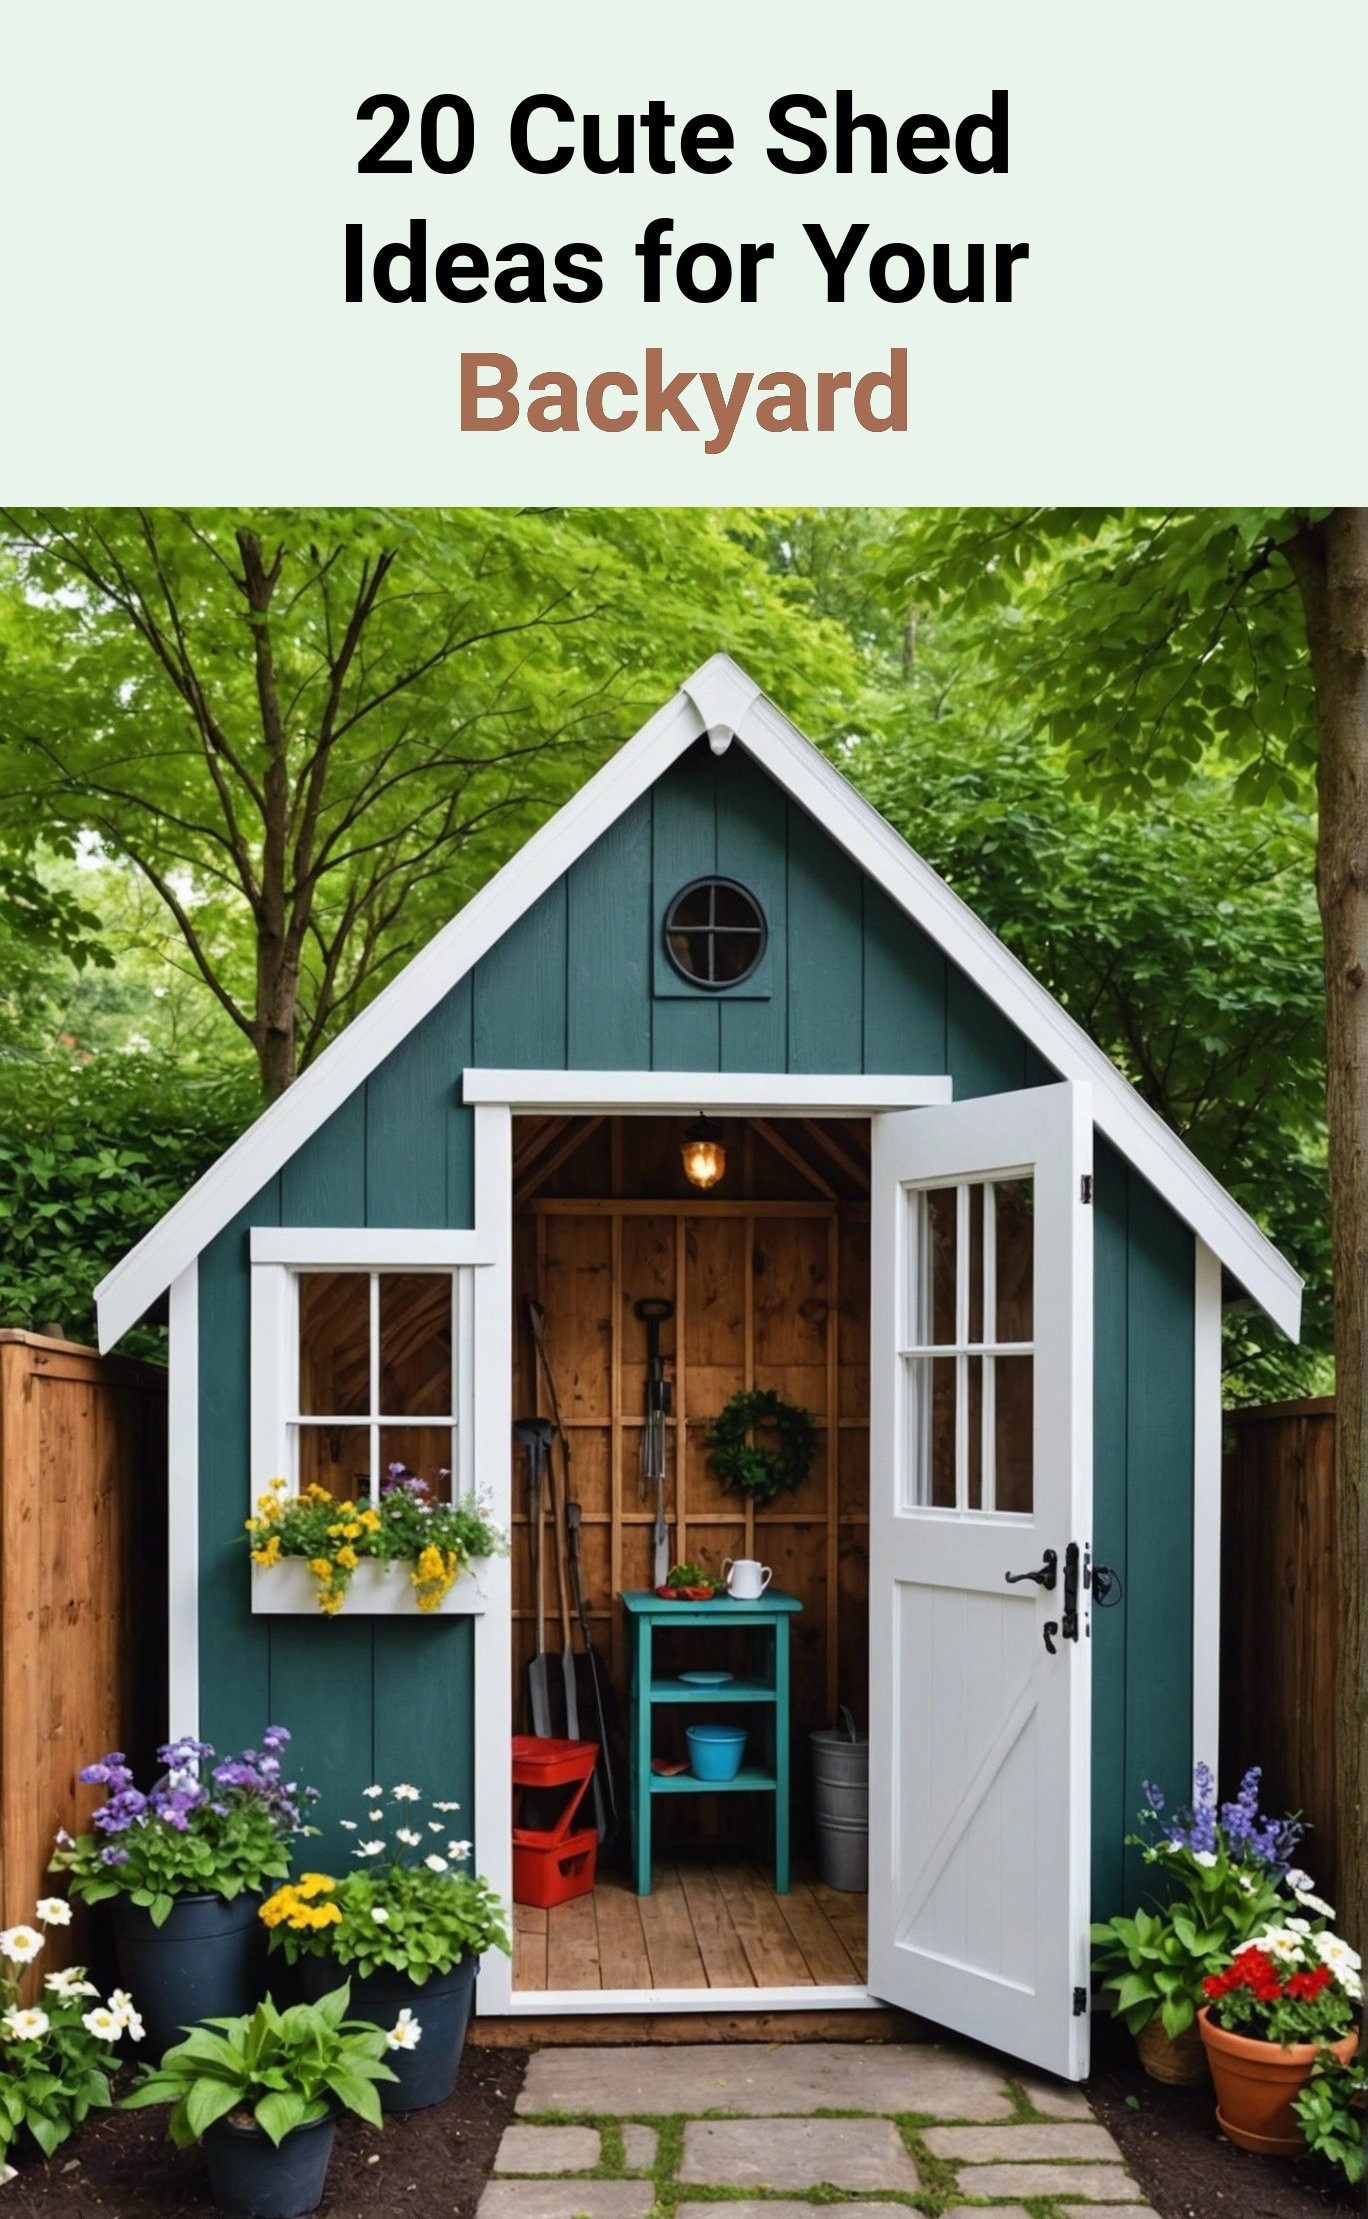 20 Cute Shed Ideas for Your Backyard